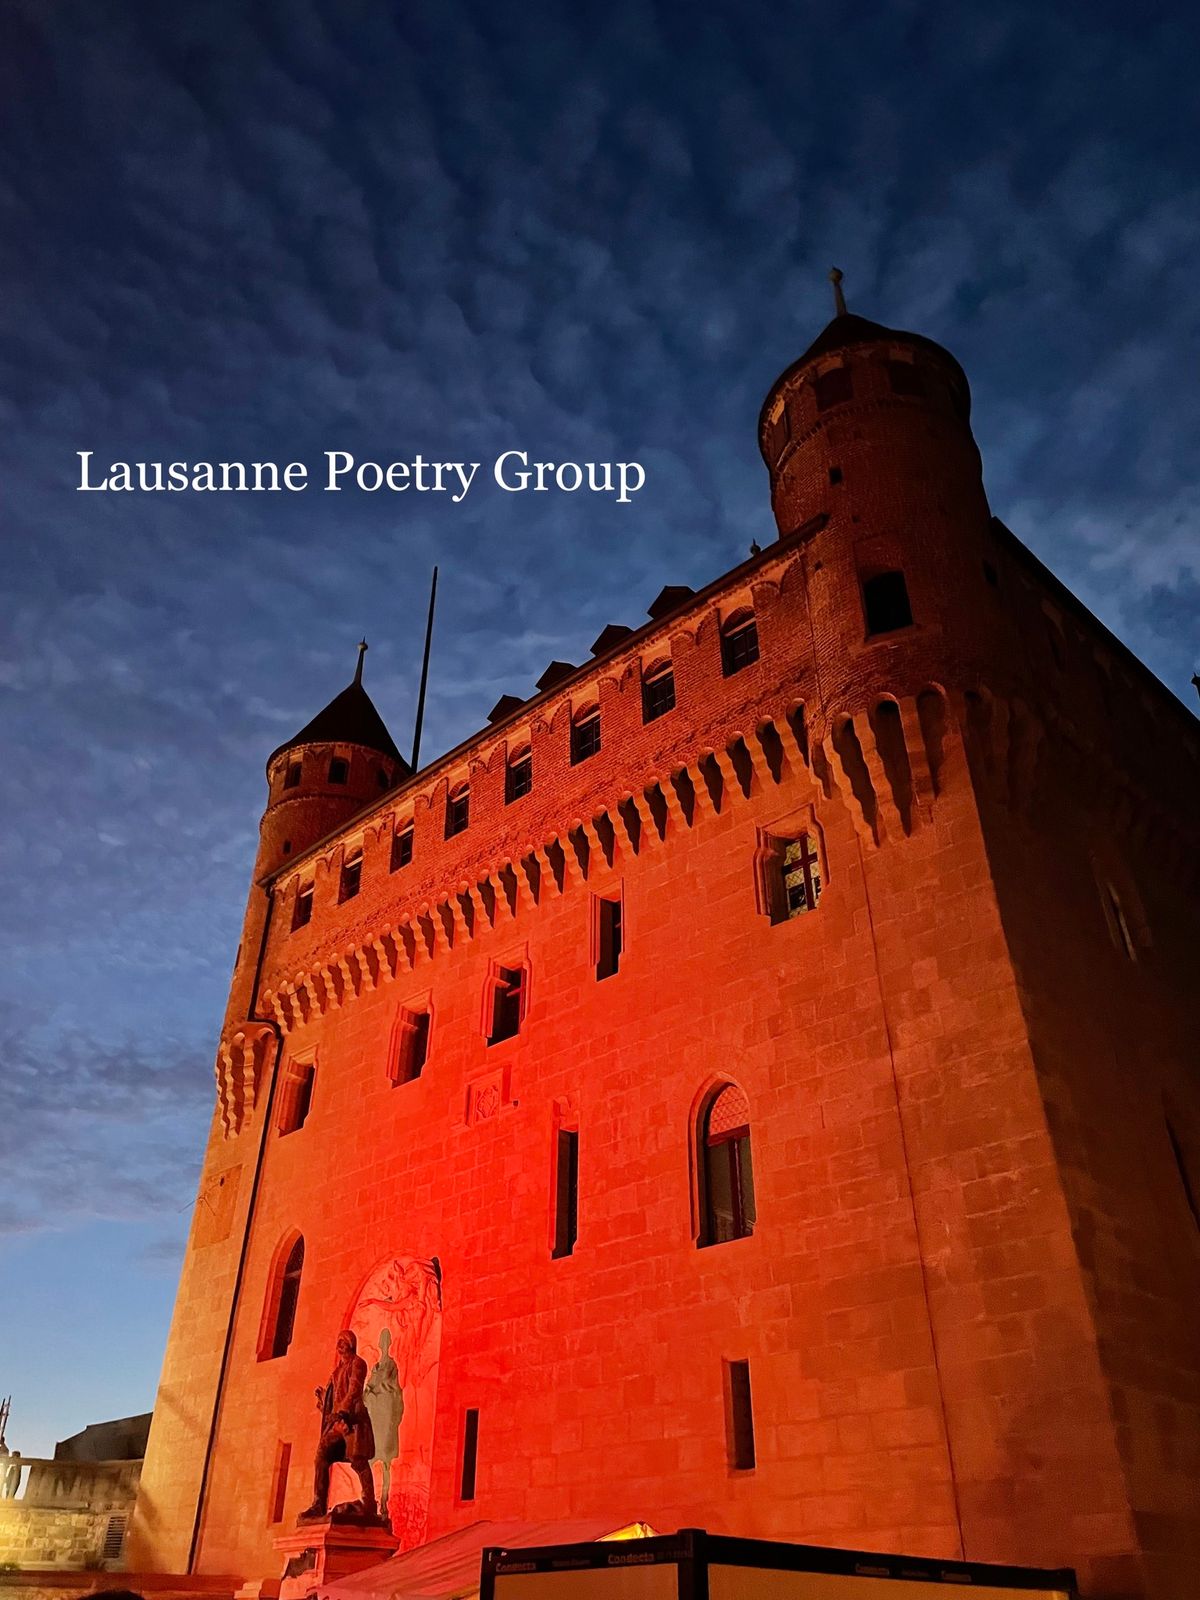 Lausanne Poetry Group